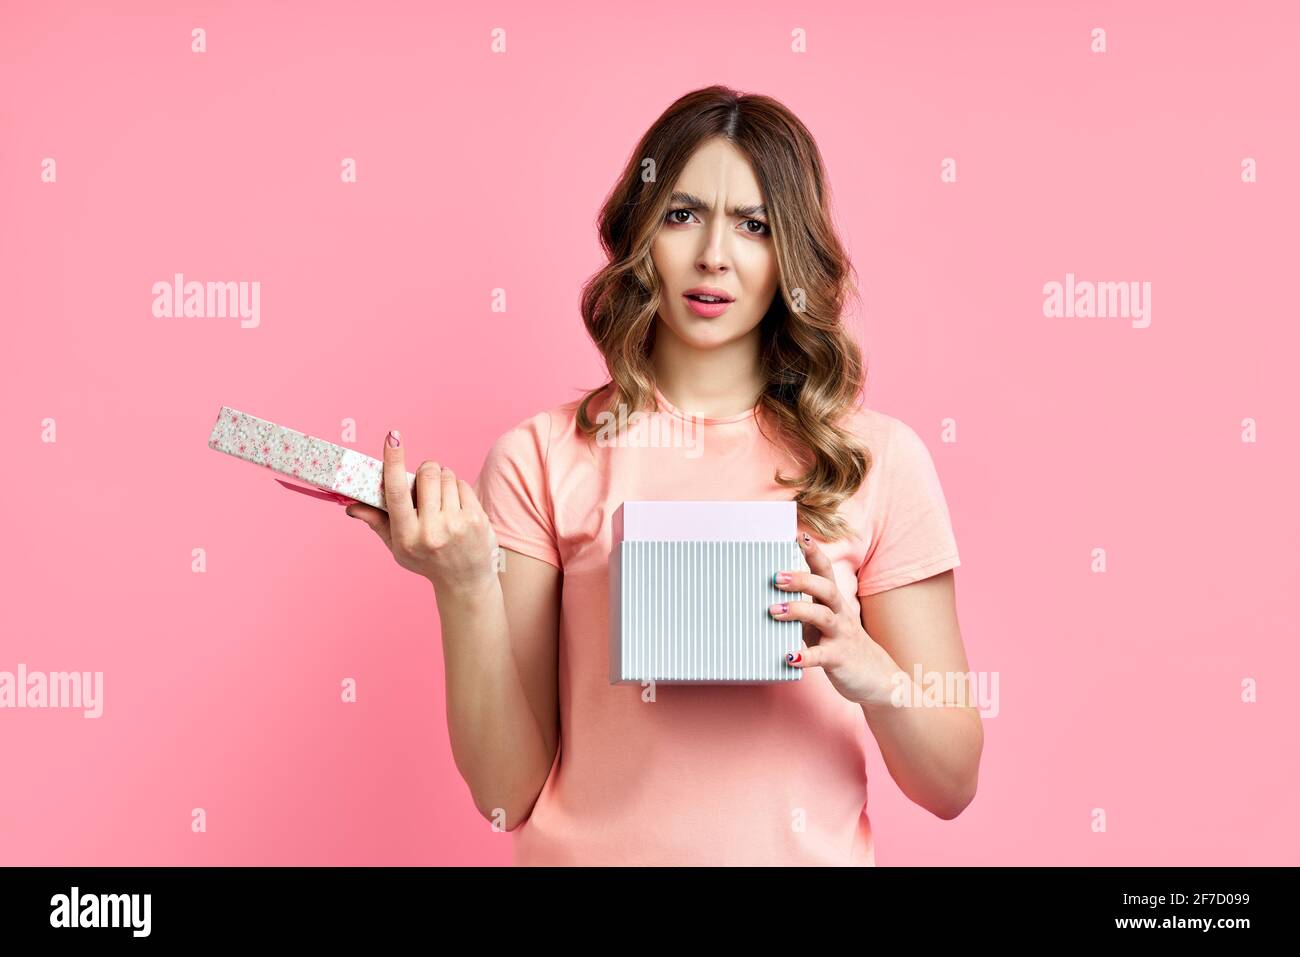 Young woman disappointed with her gift box on pink background. Bad present, emotion concept Stock Photo